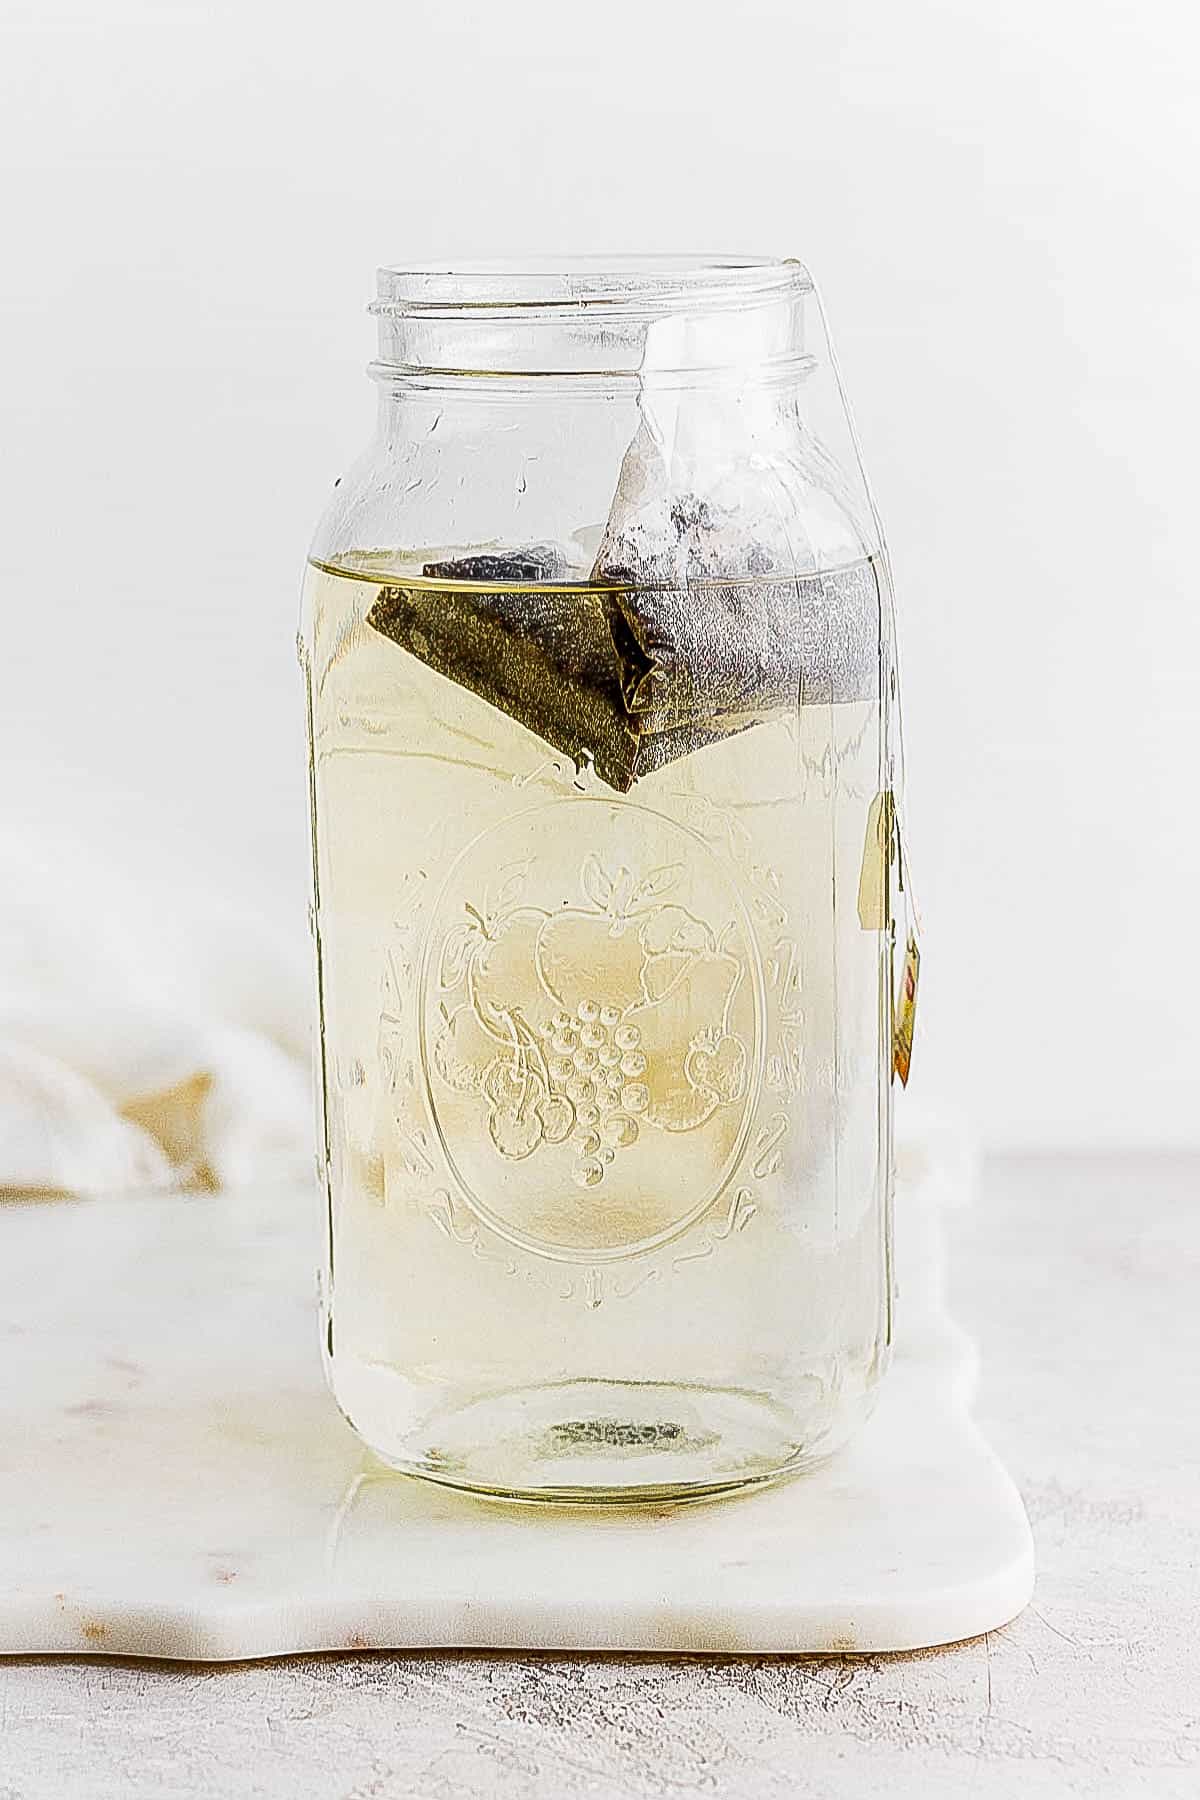 Tea bags placed in water in a glass container.